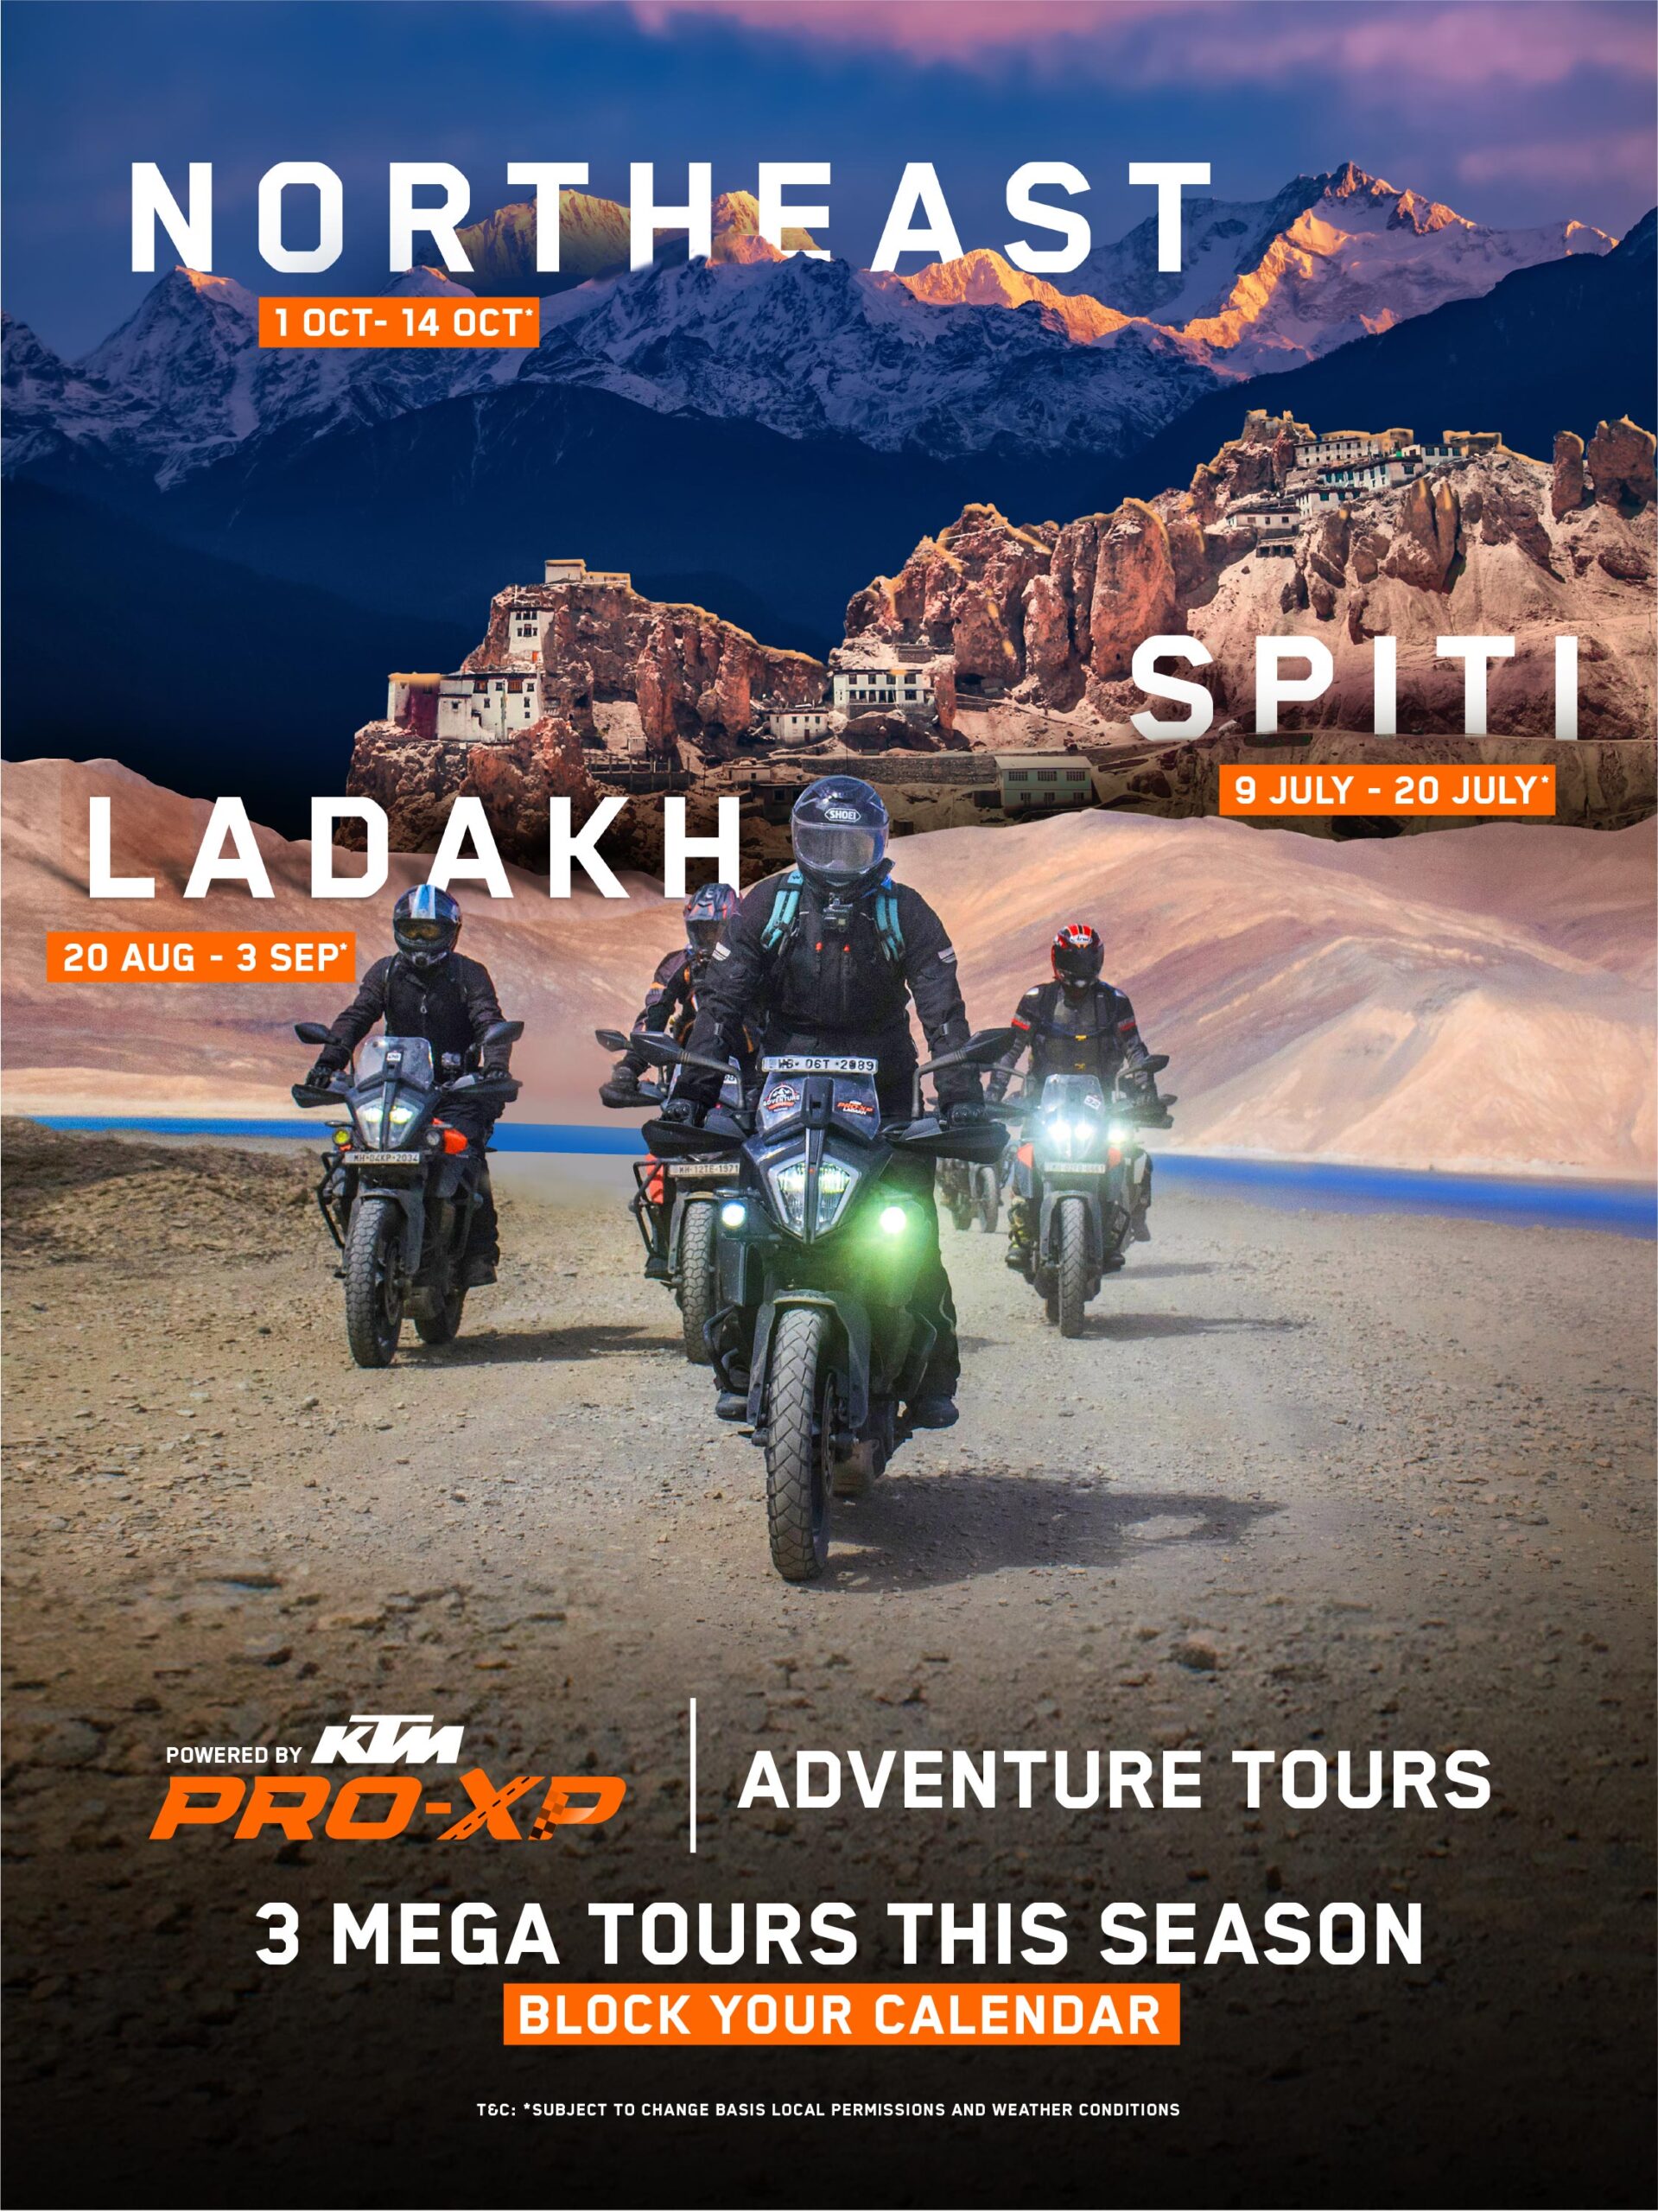 KTM India Ladakh Tour Now Ready To Book For Adventure Seekers!